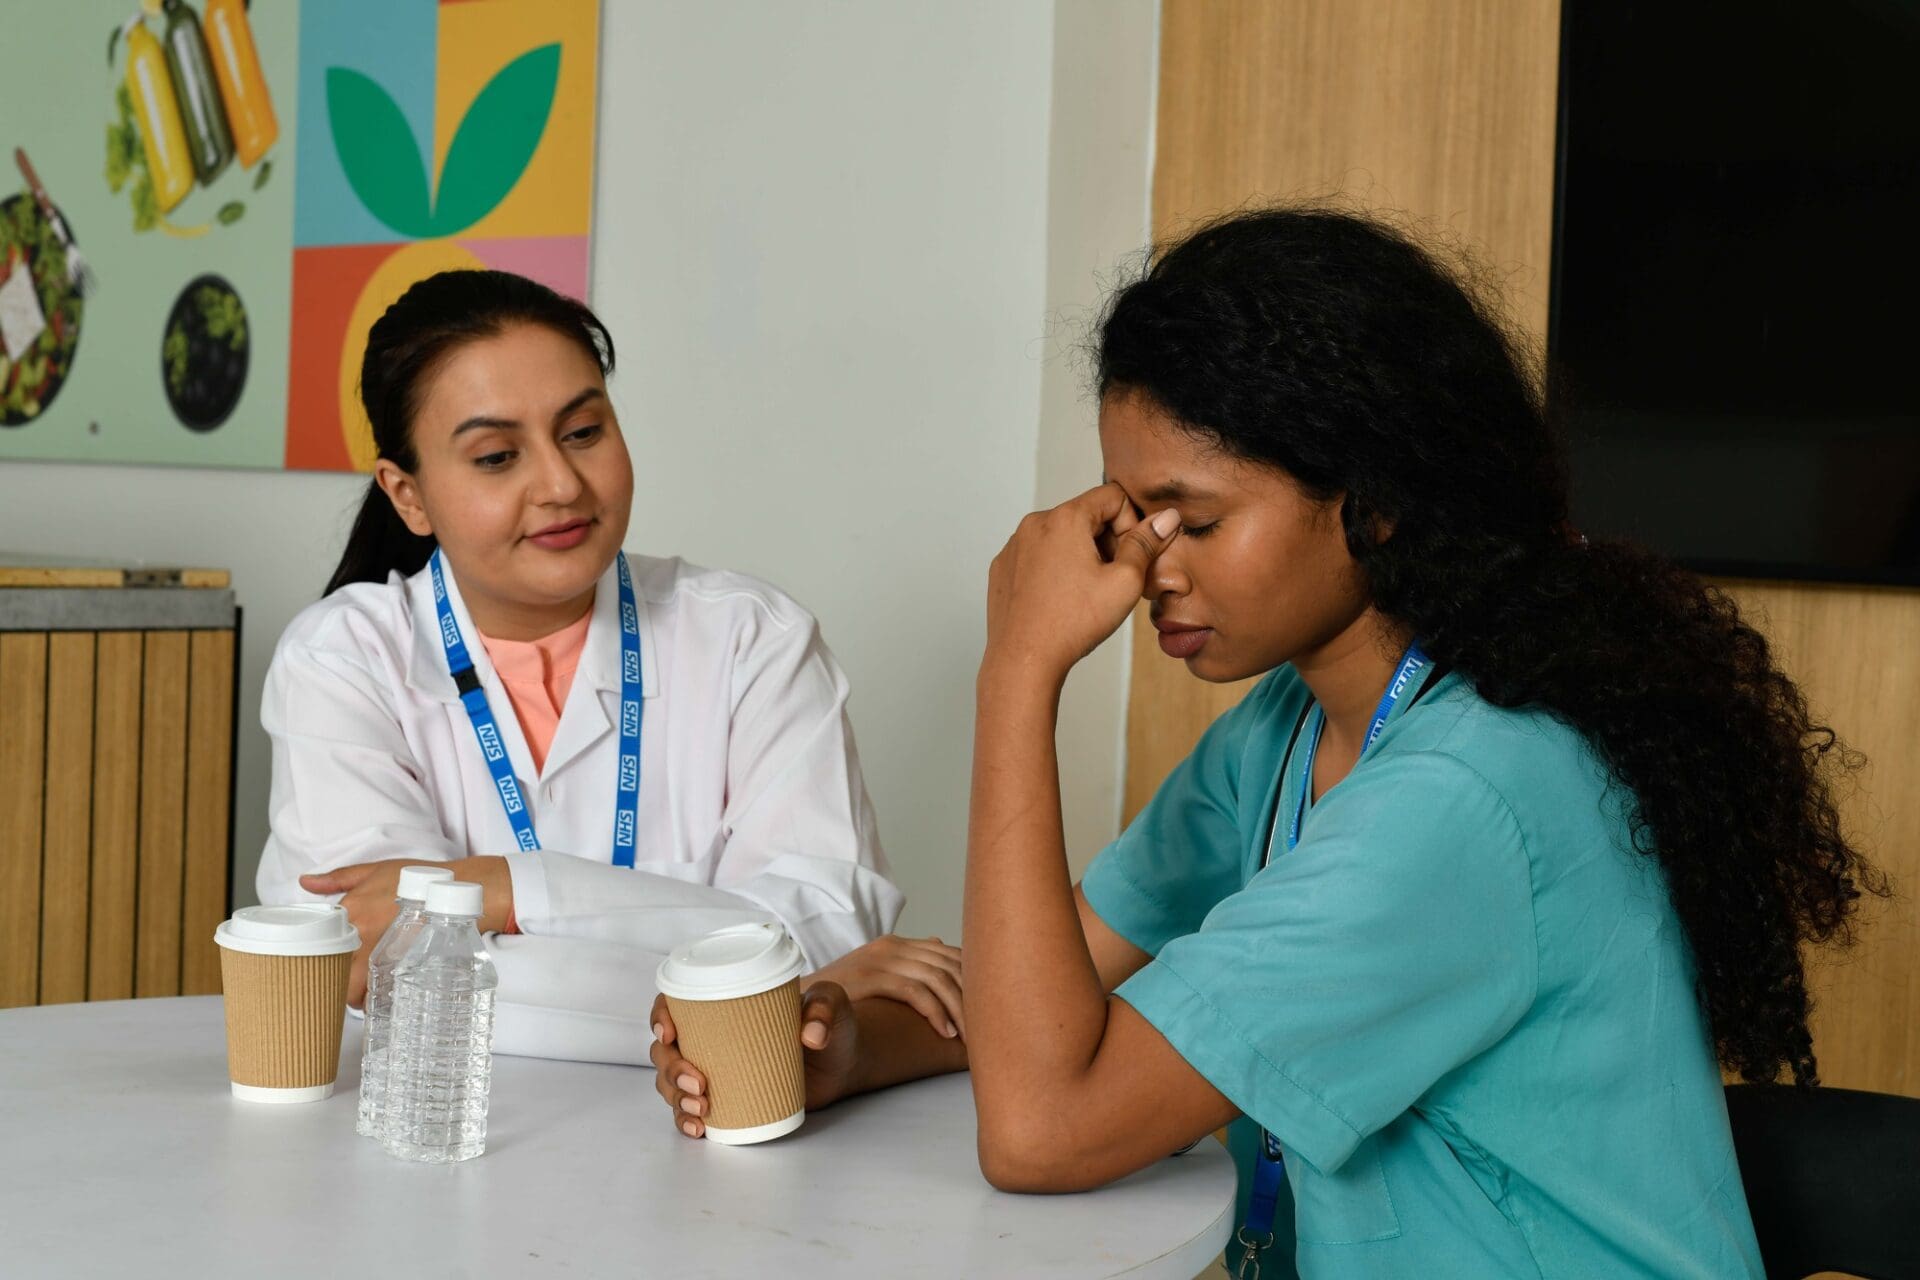 Two doctors sitting at a a table, one with their hand to their face and the other offering support